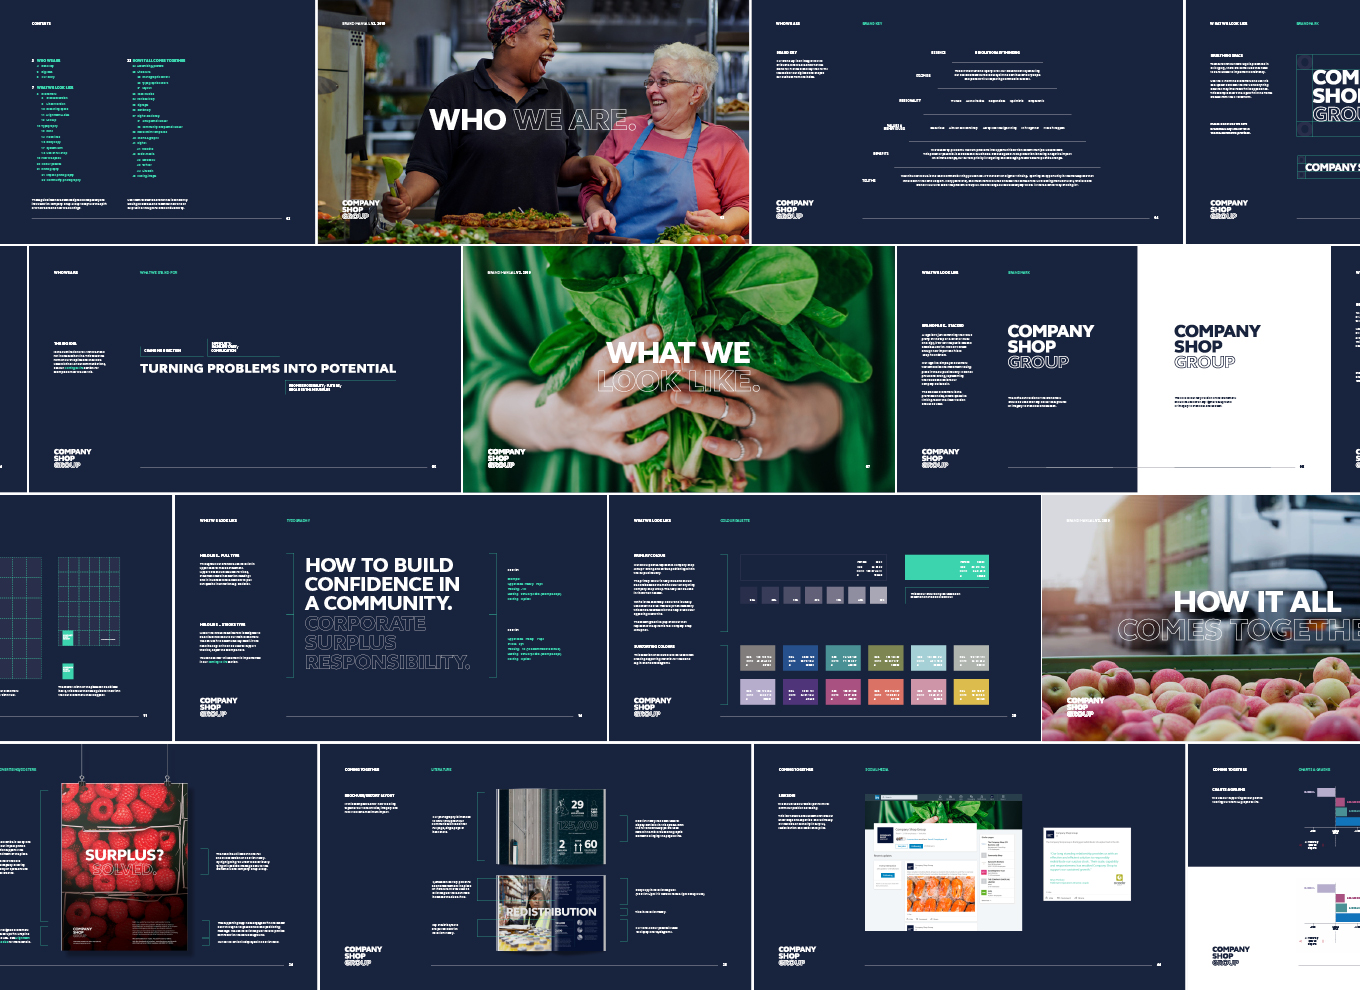 Company Shop Group Brand Guidelines